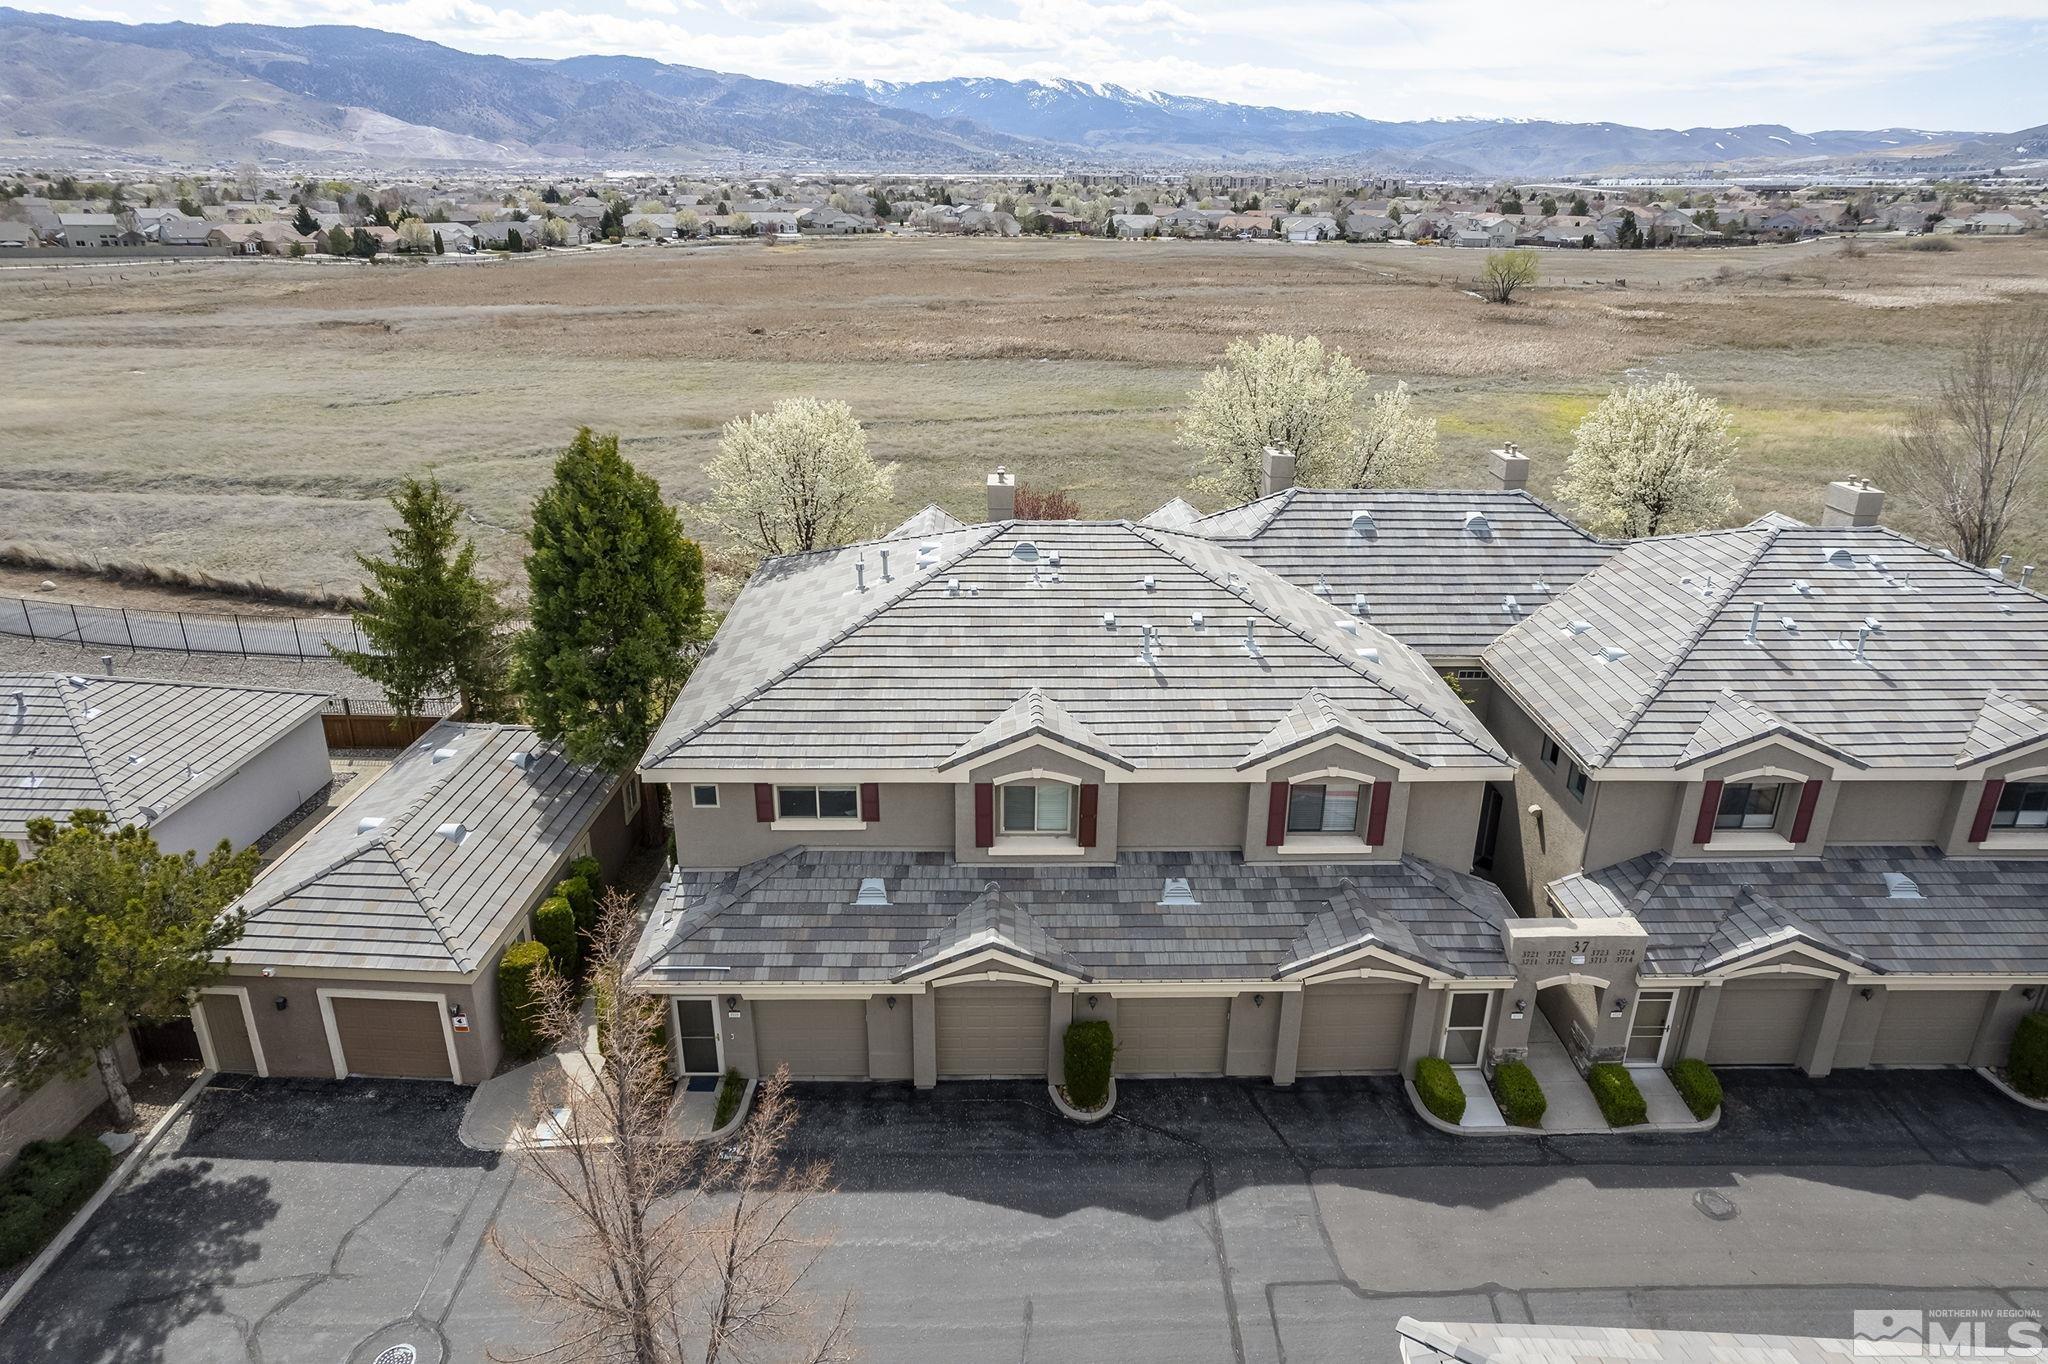 Condos, Lofts and Townhomes for Sale in Reno Luxury Condos